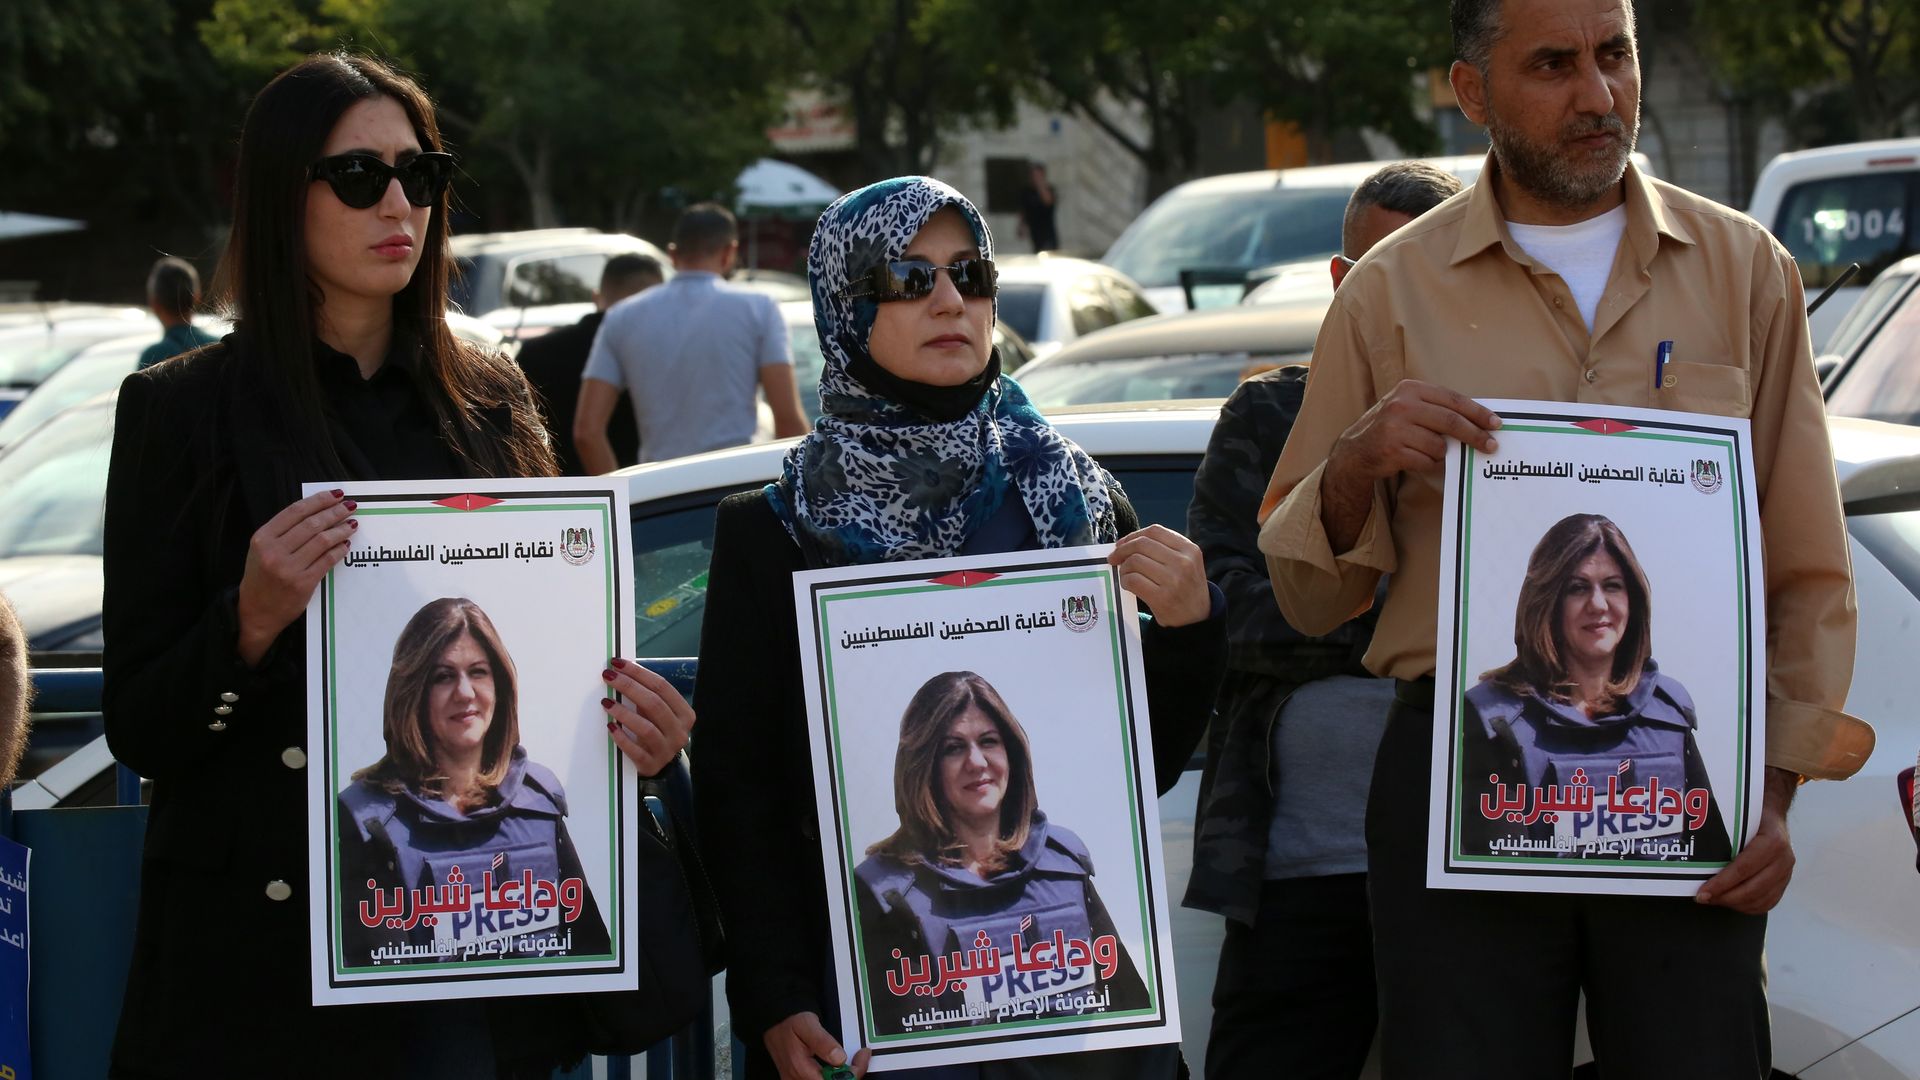 A group of Palestinian journalist gather to protest the killing of Al Jazeera journalist Shireen Abu Akleh